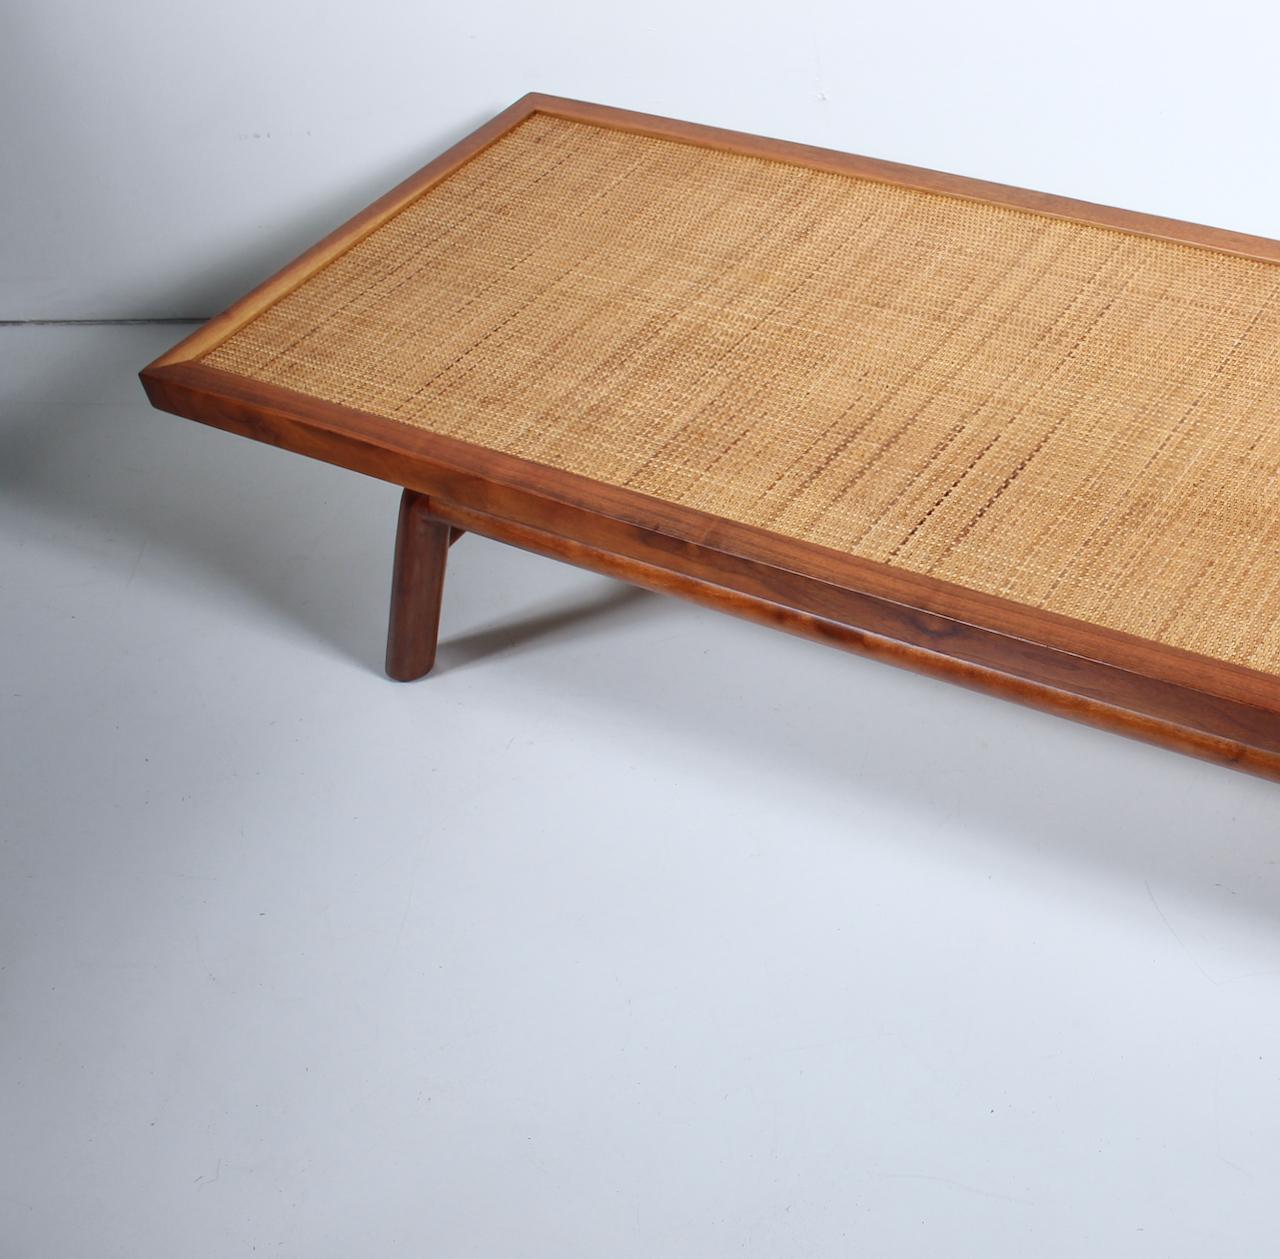 T. H. Robsjohn-Gibbings Low Mahogany & Cane Bench, Coffee Table, 1950's In Good Condition For Sale In Bainbridge, NY